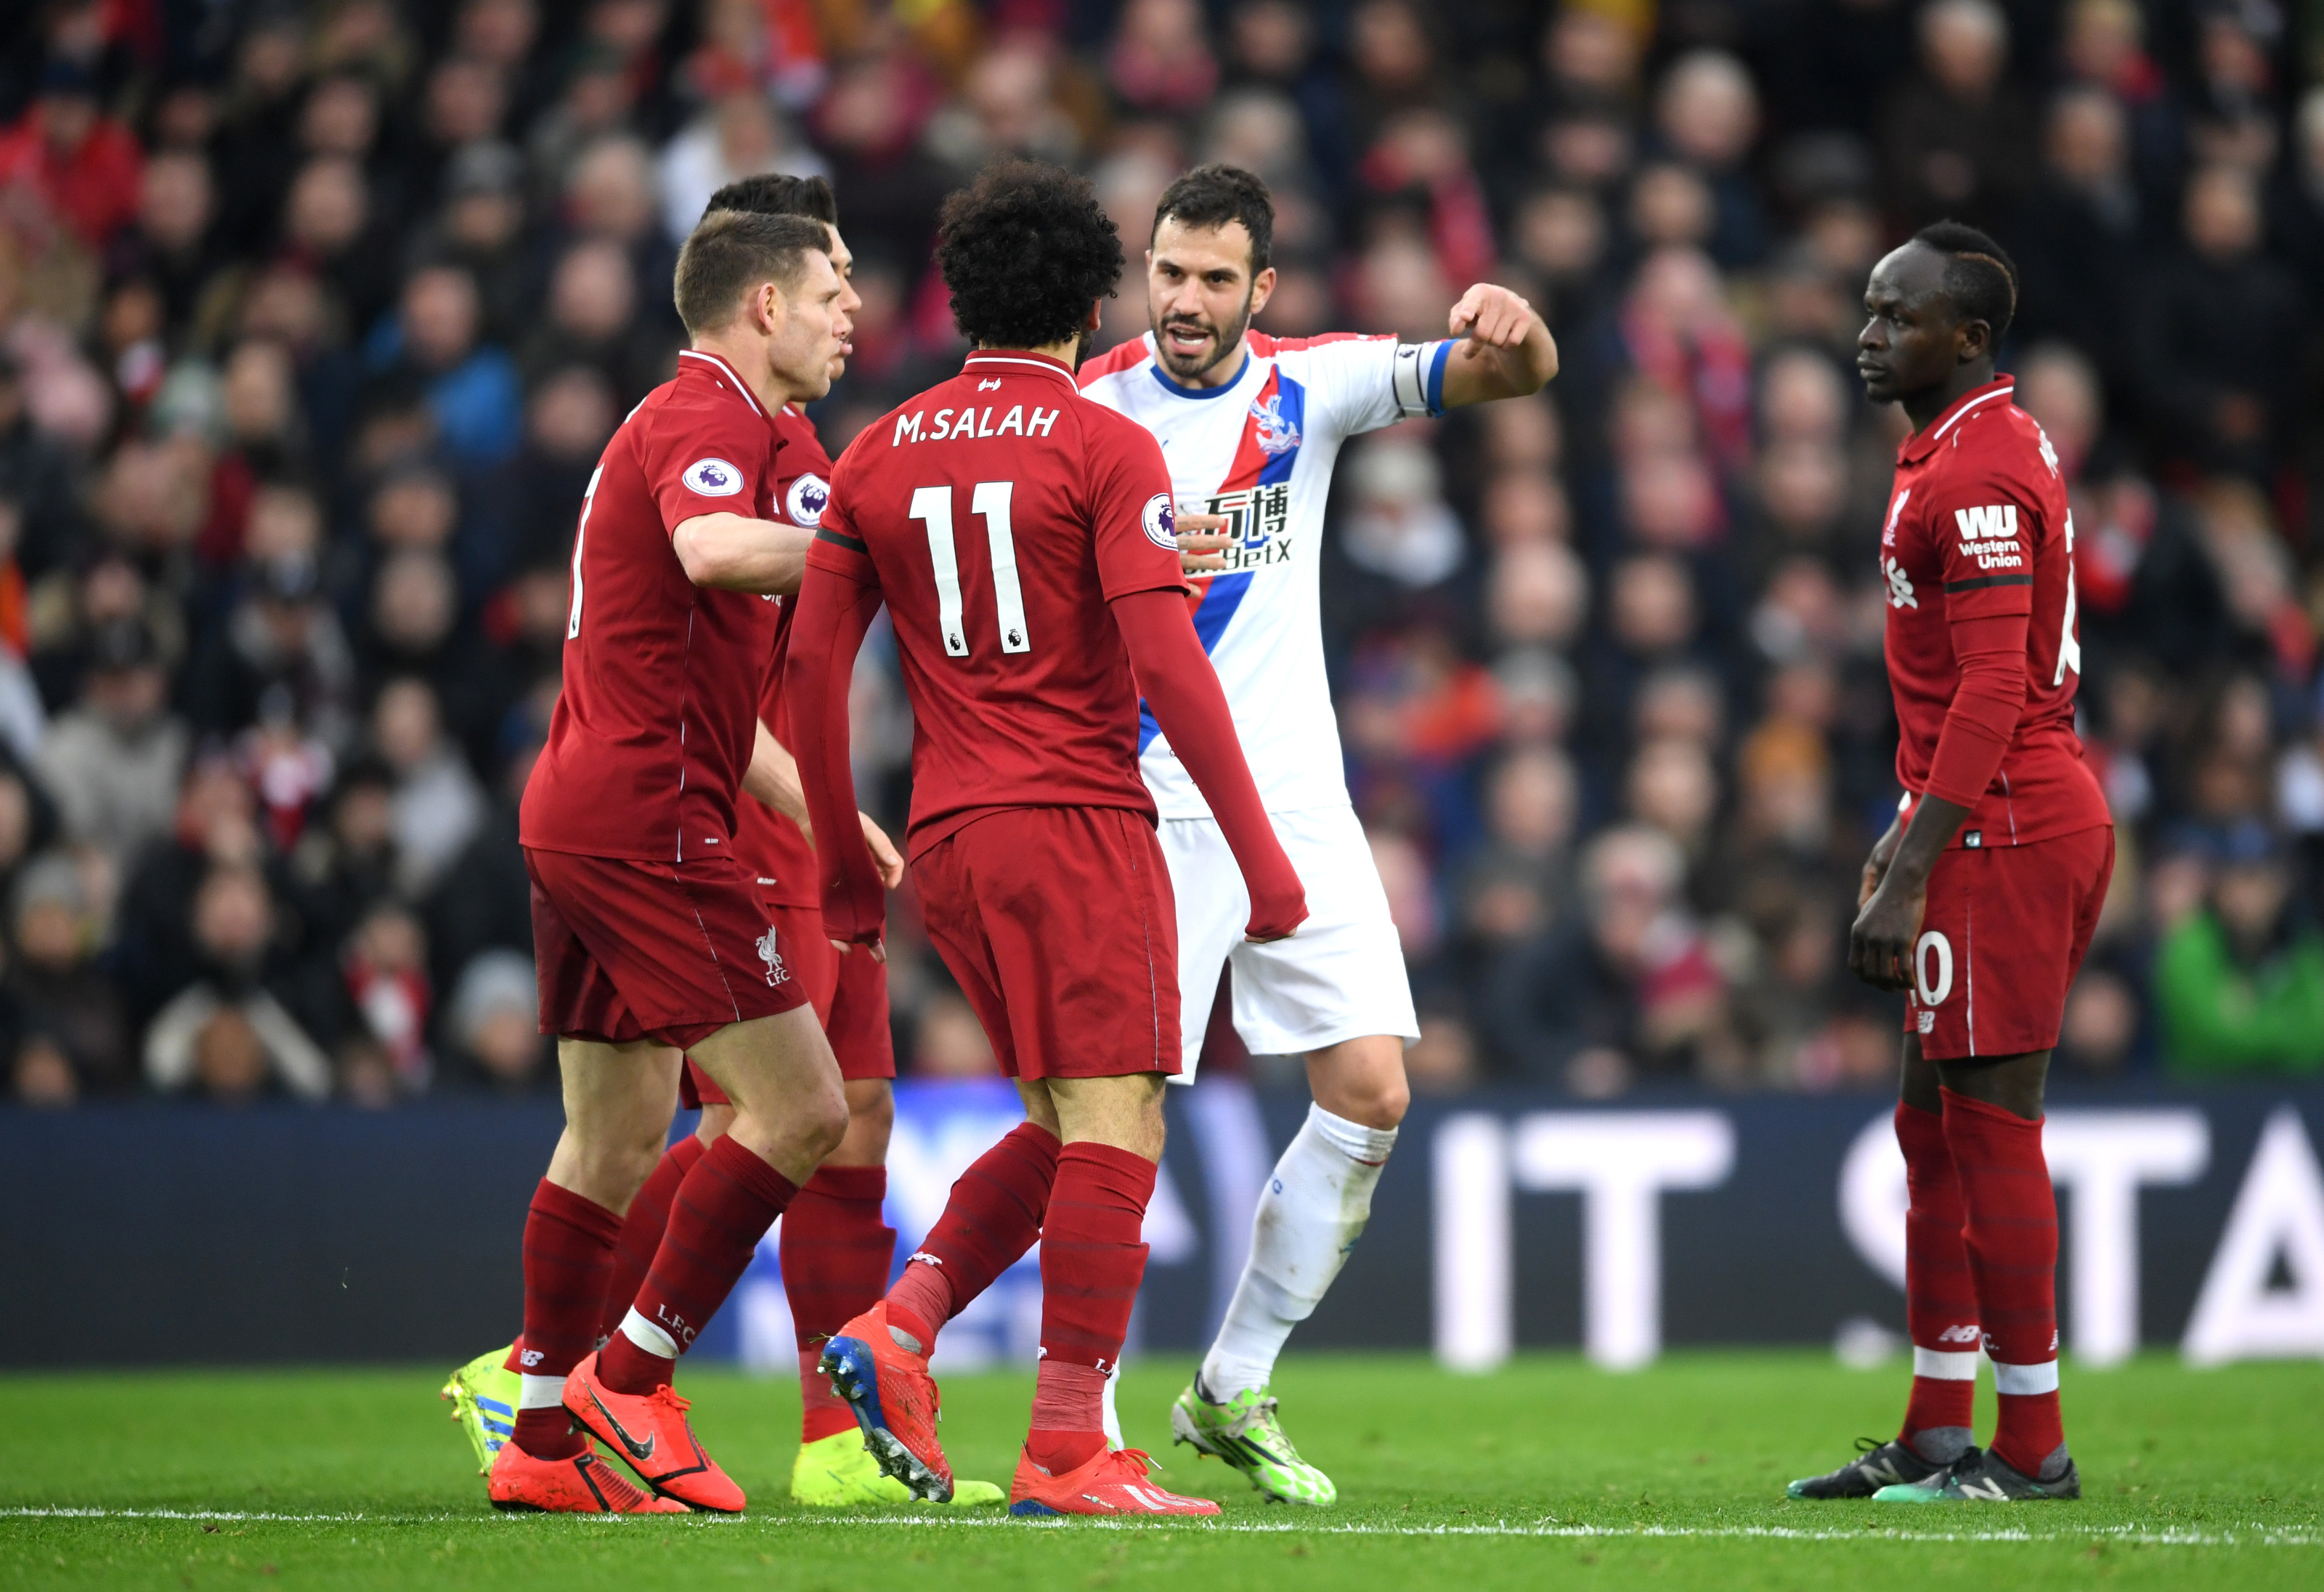 Liverpool vs Crystal Palace live stream Watch the boys avoid Crystanbul for free!